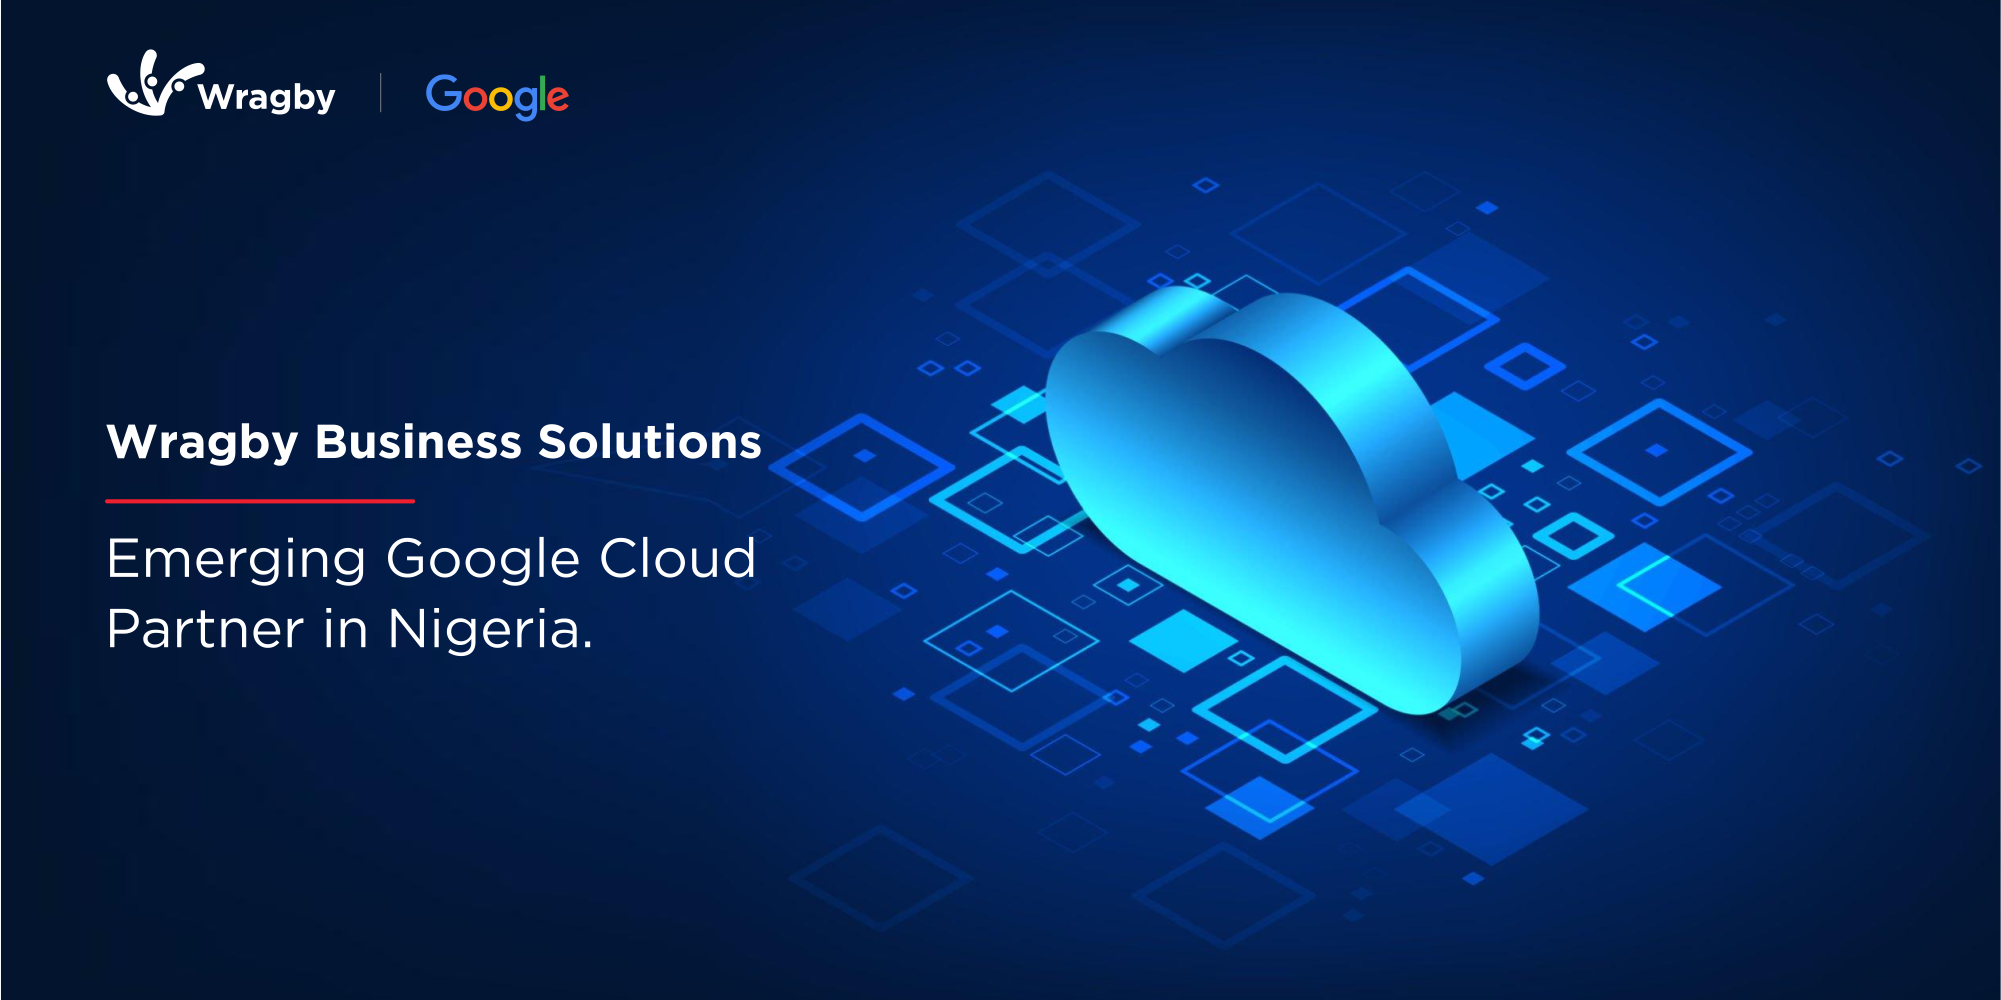 Emerging Google Cloud Partner in Nigeria - Wragby Business Solutions